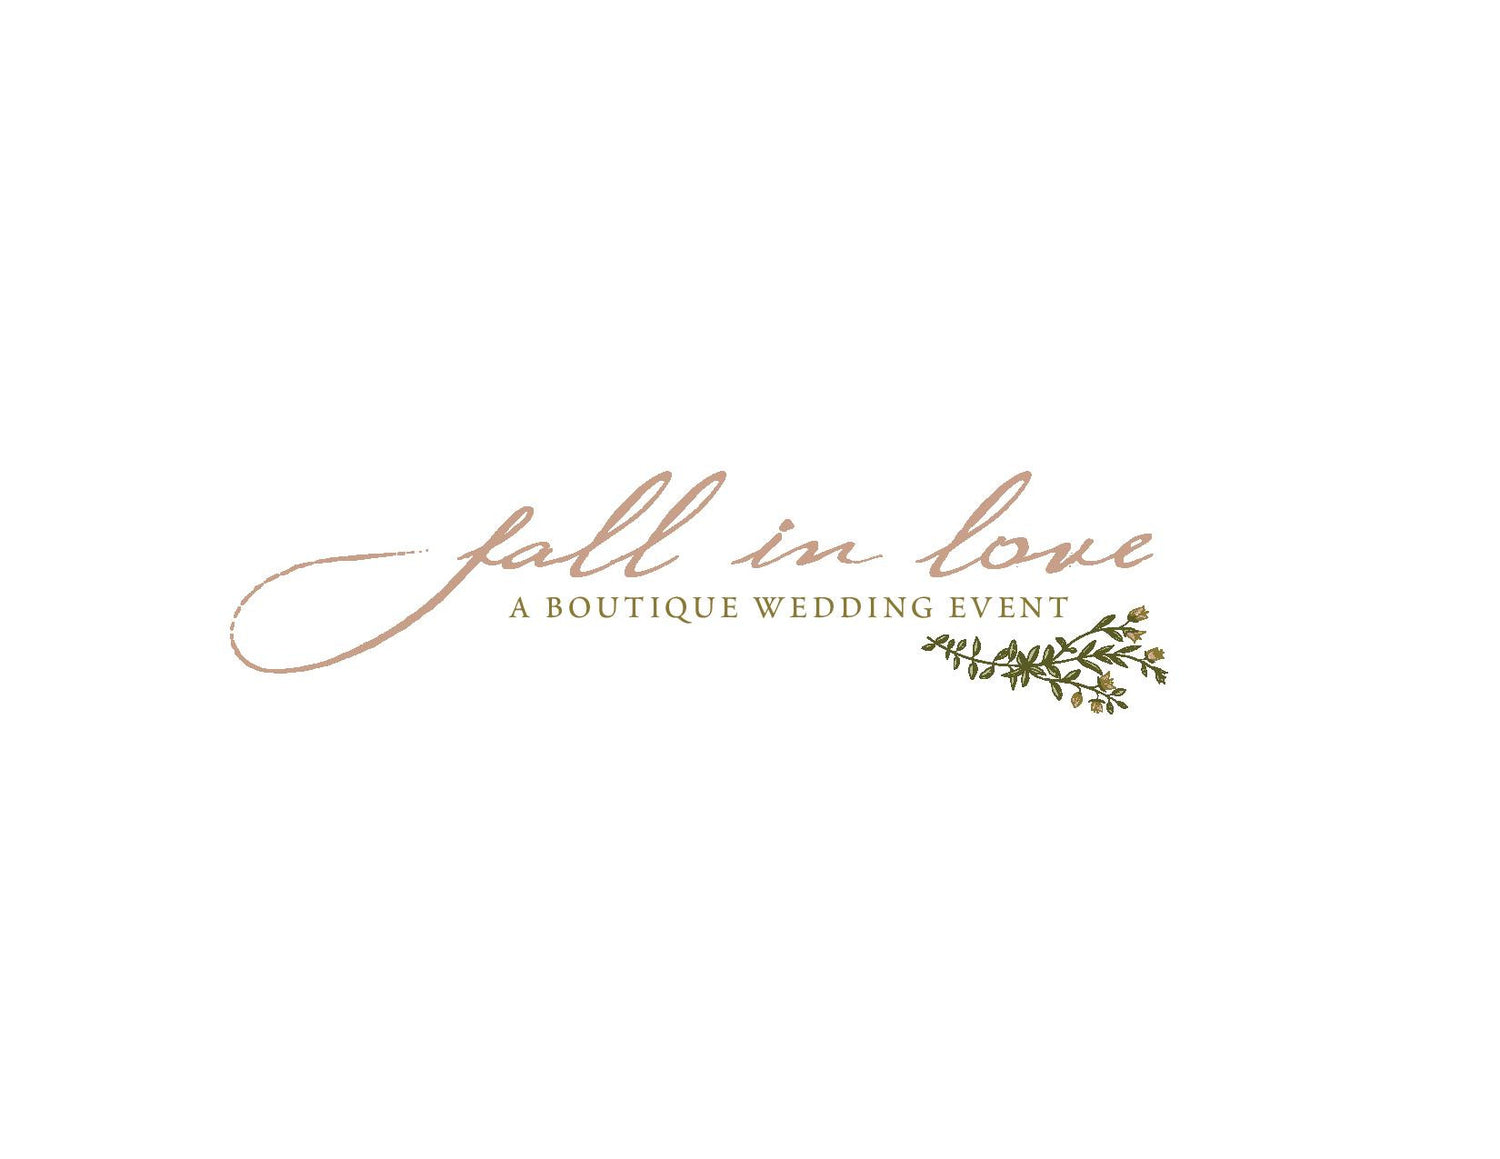 Fall In Love with Philly’s Top Wedding Vendors at our Bridal Showcase This October!